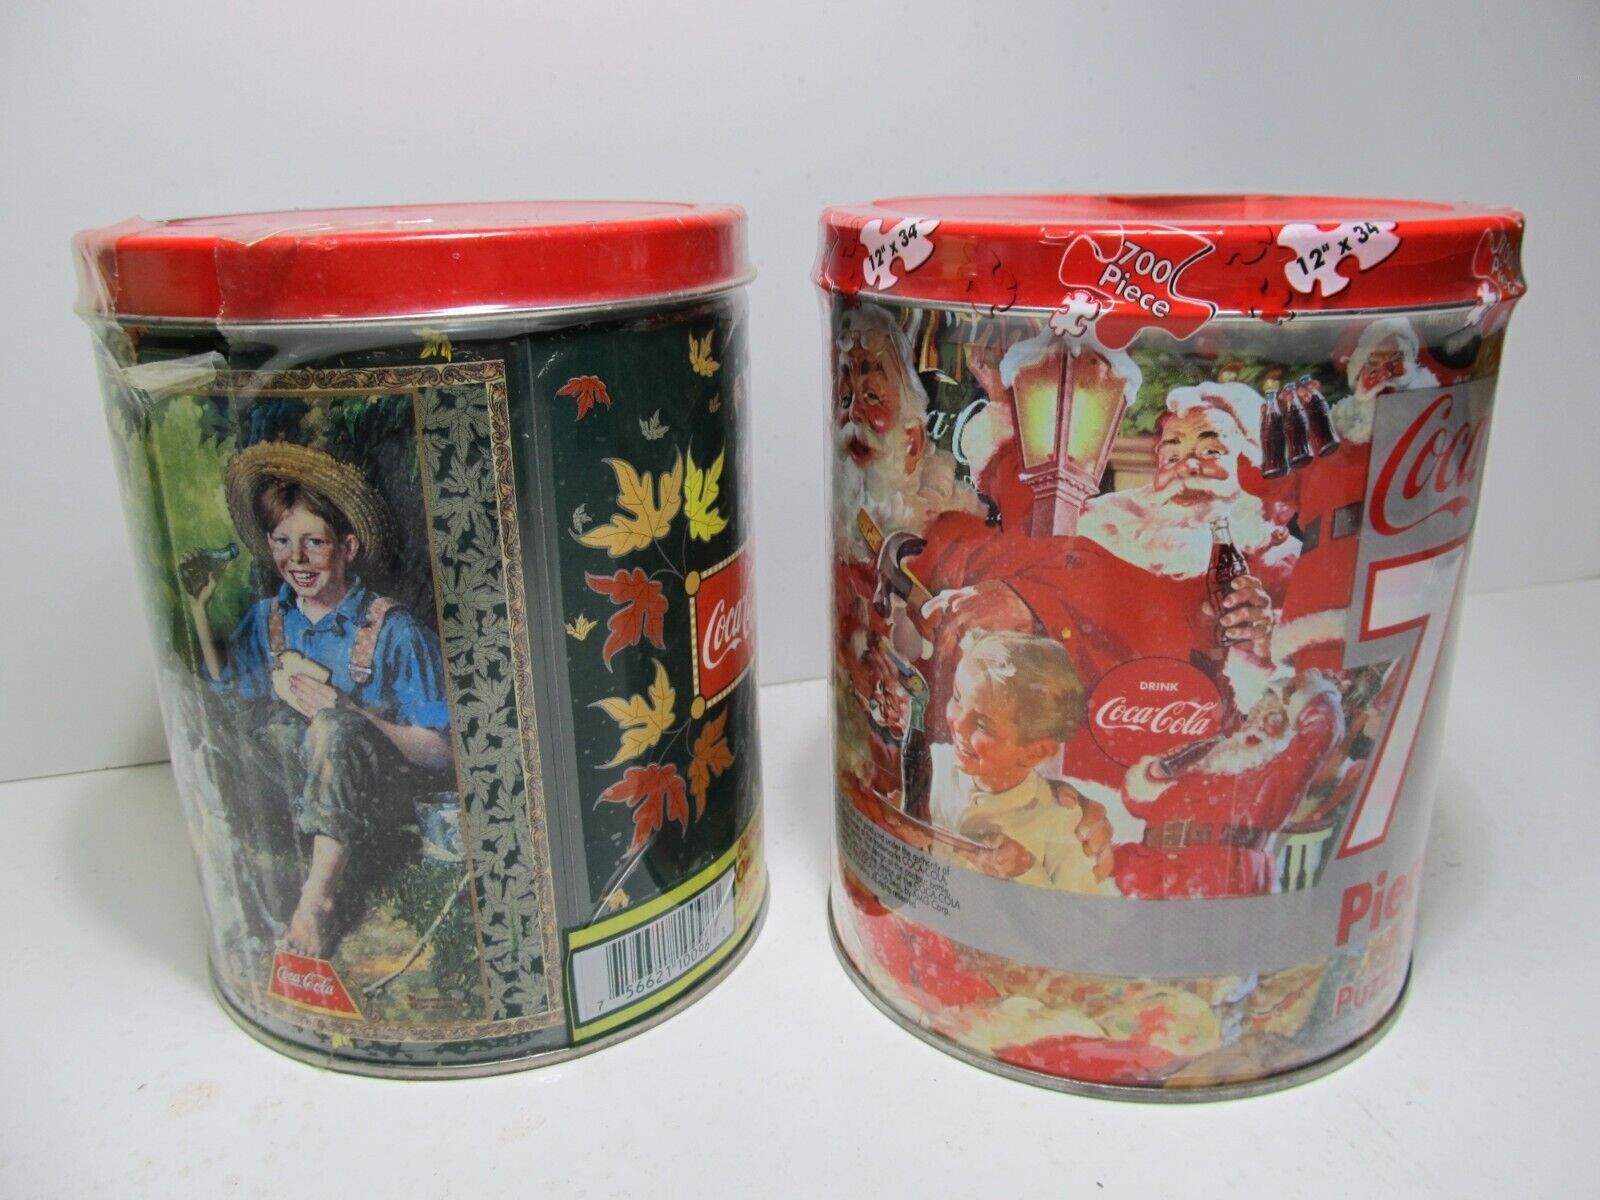 Lot of 2 New Coca-Cola Jigsaw Puzzles in Tin Cans